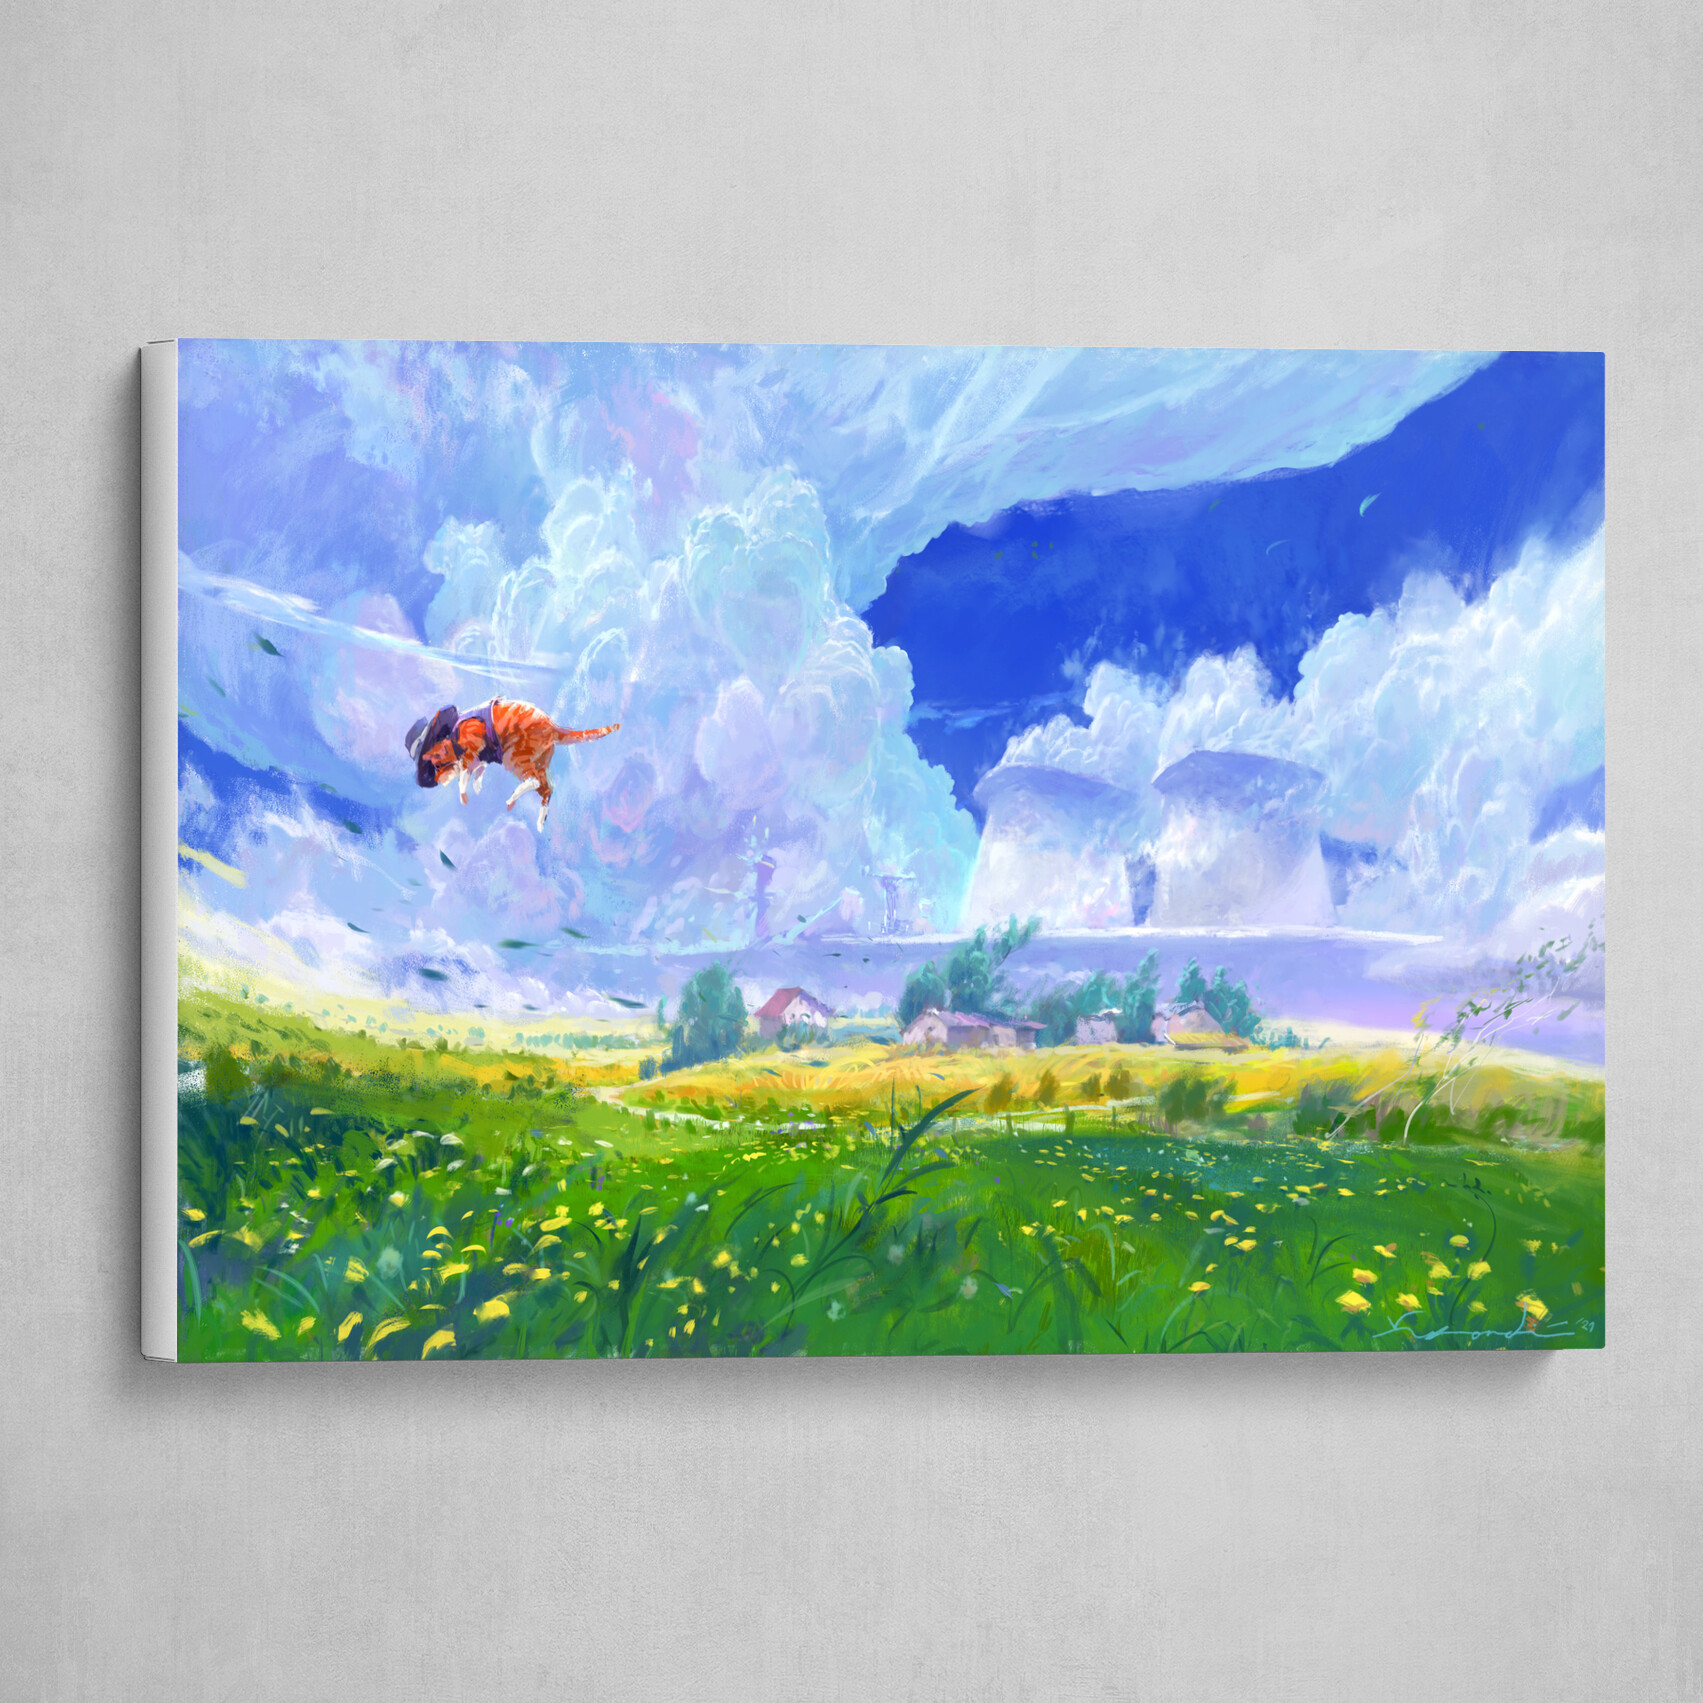 Will of the Winds: Canvas and Metal print edit